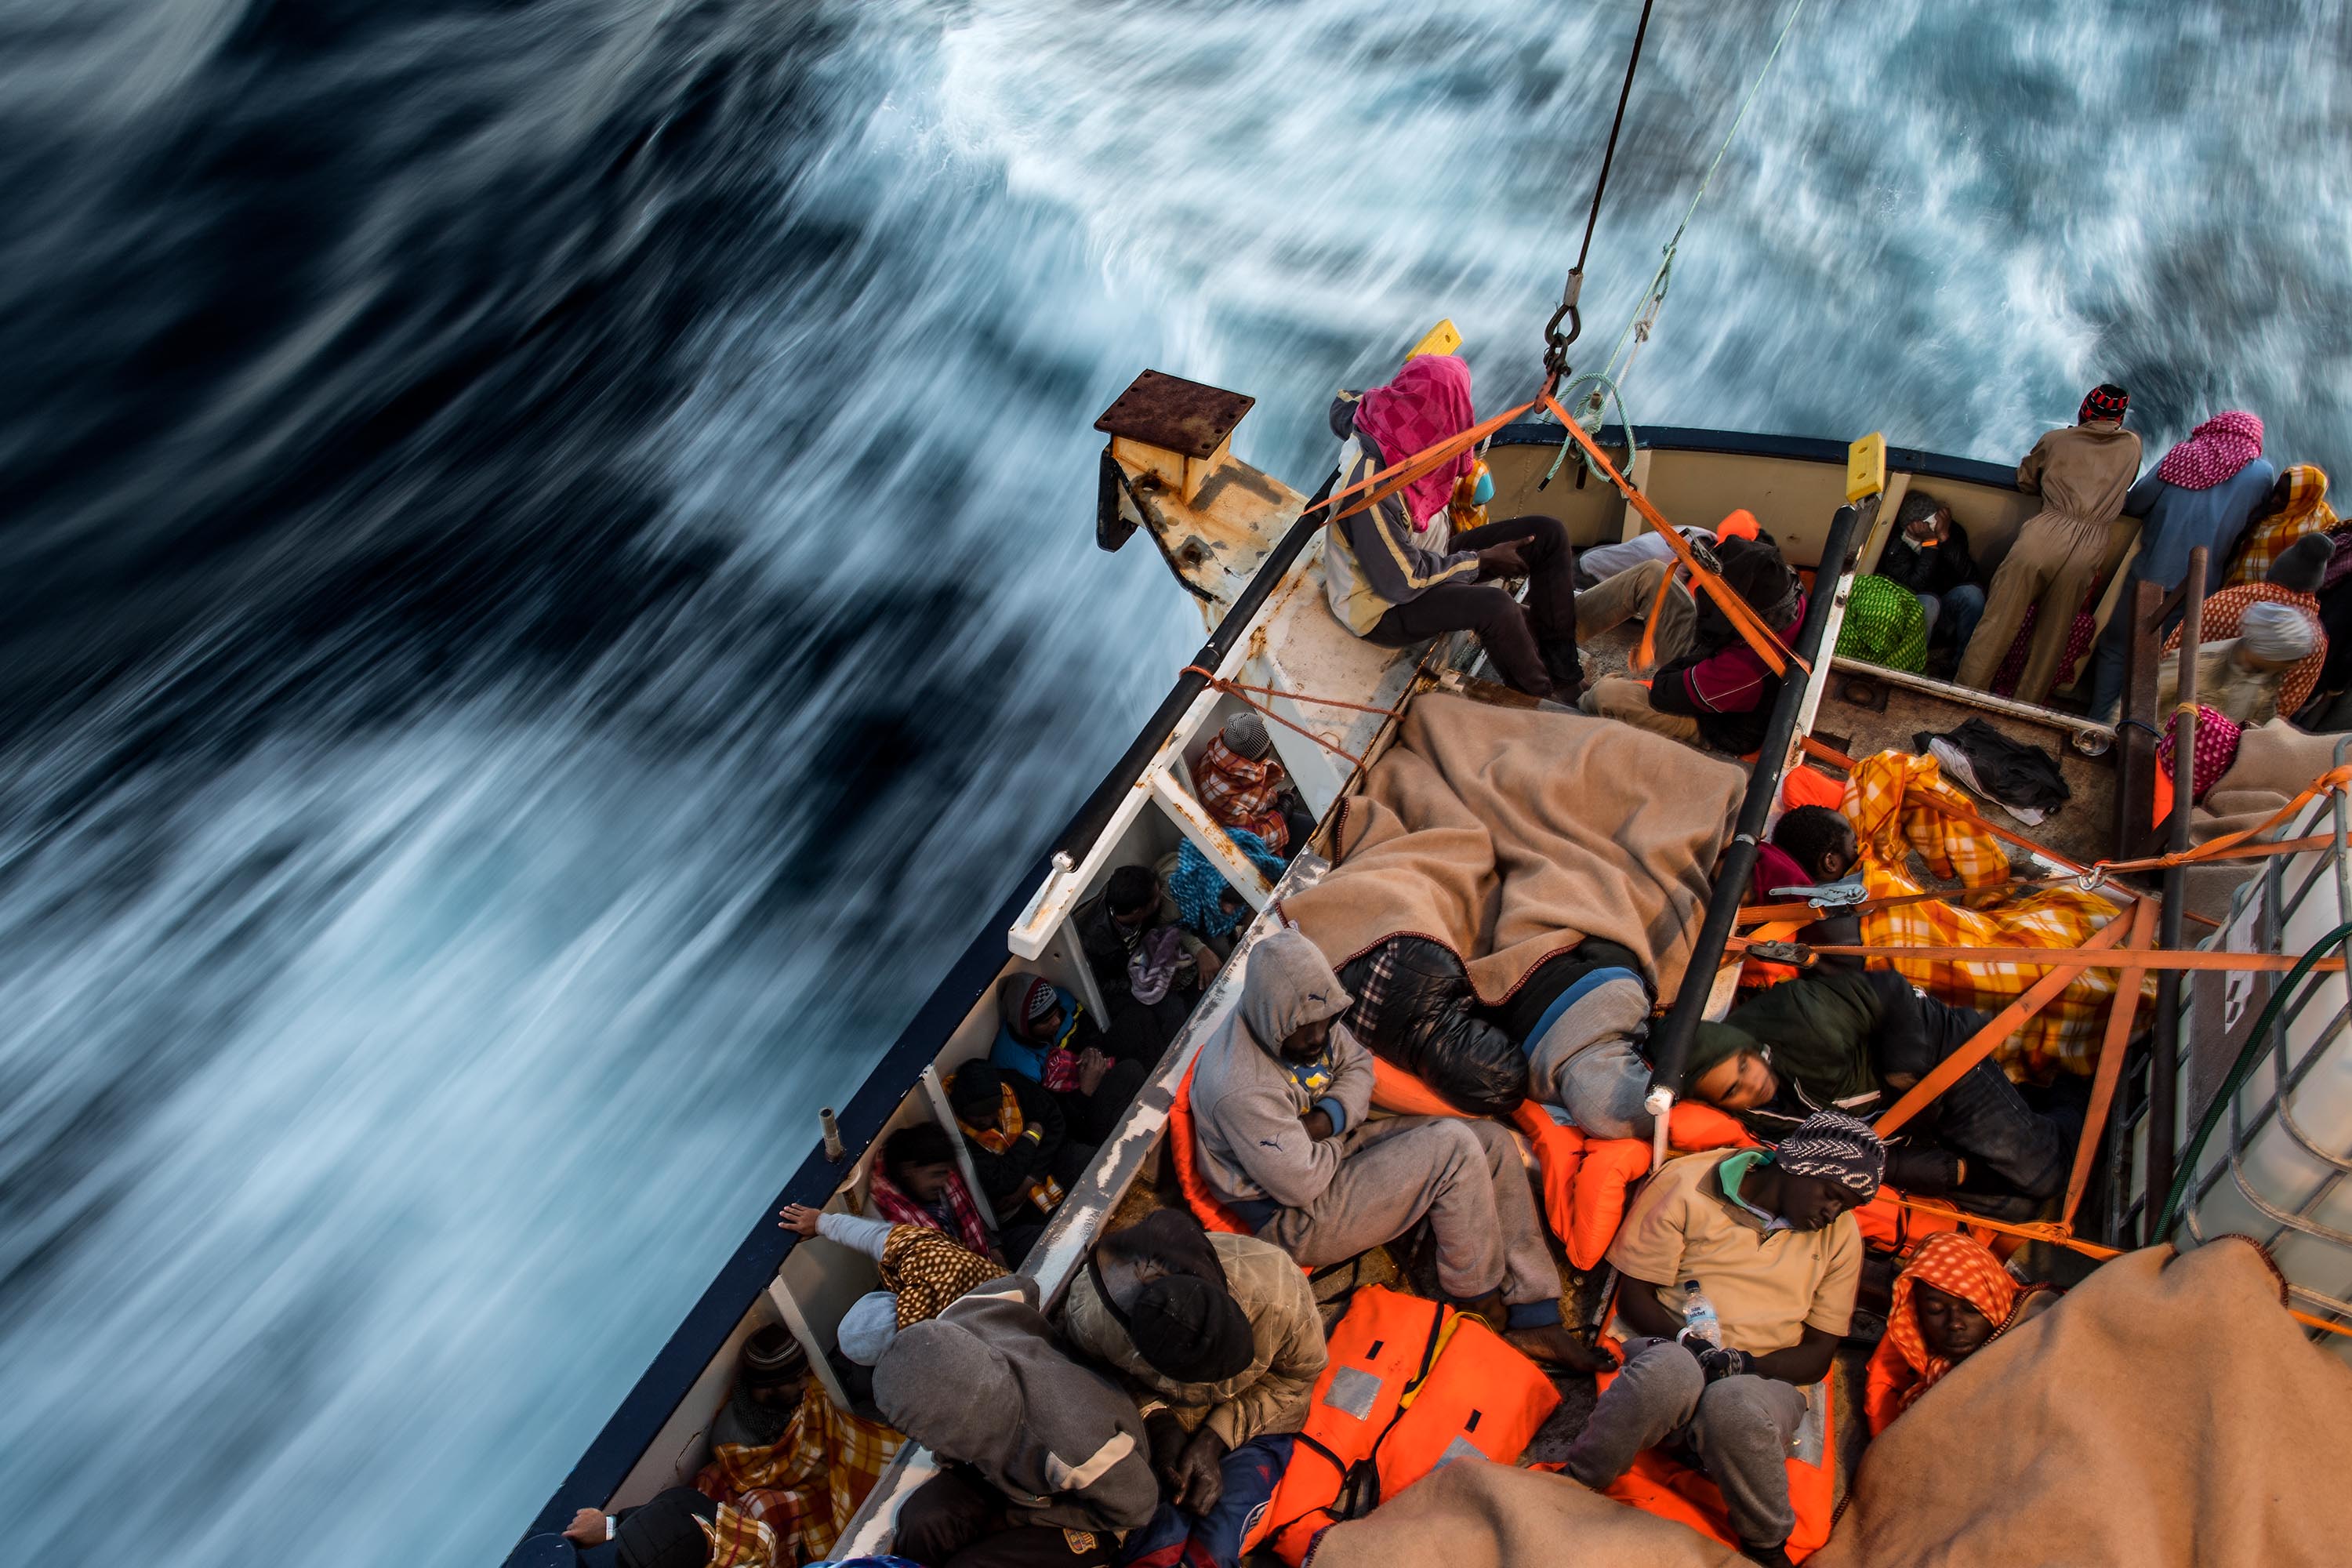 A picture of migrants packed together tightly in a boat sailing on the sea.